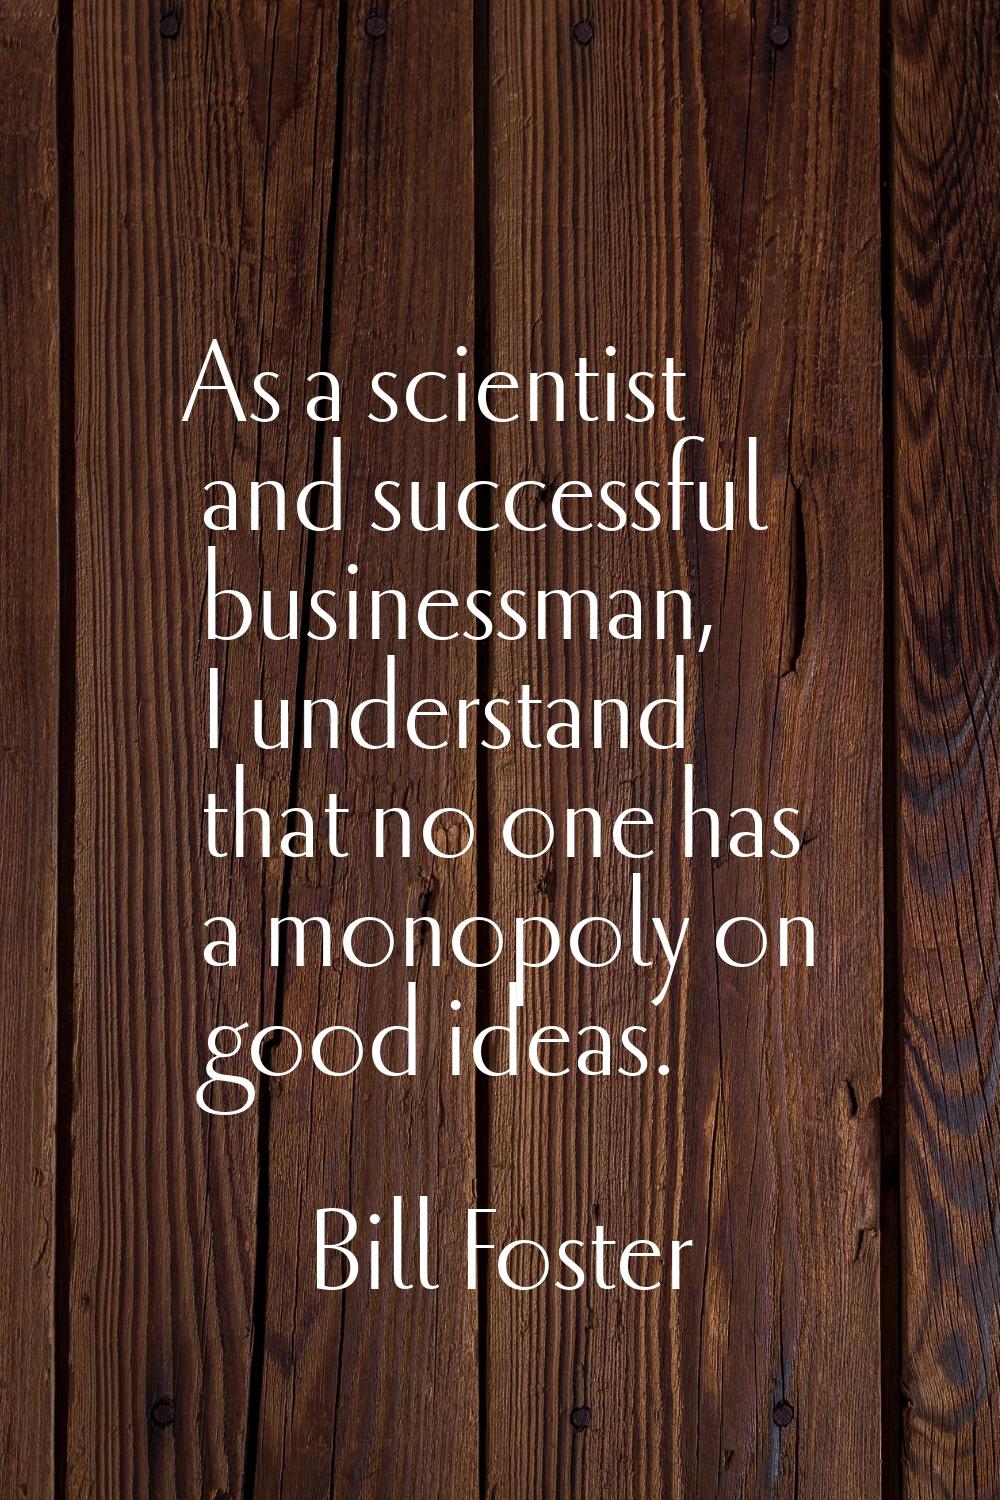 As a scientist and successful businessman, I understand that no one has a monopoly on good ideas.